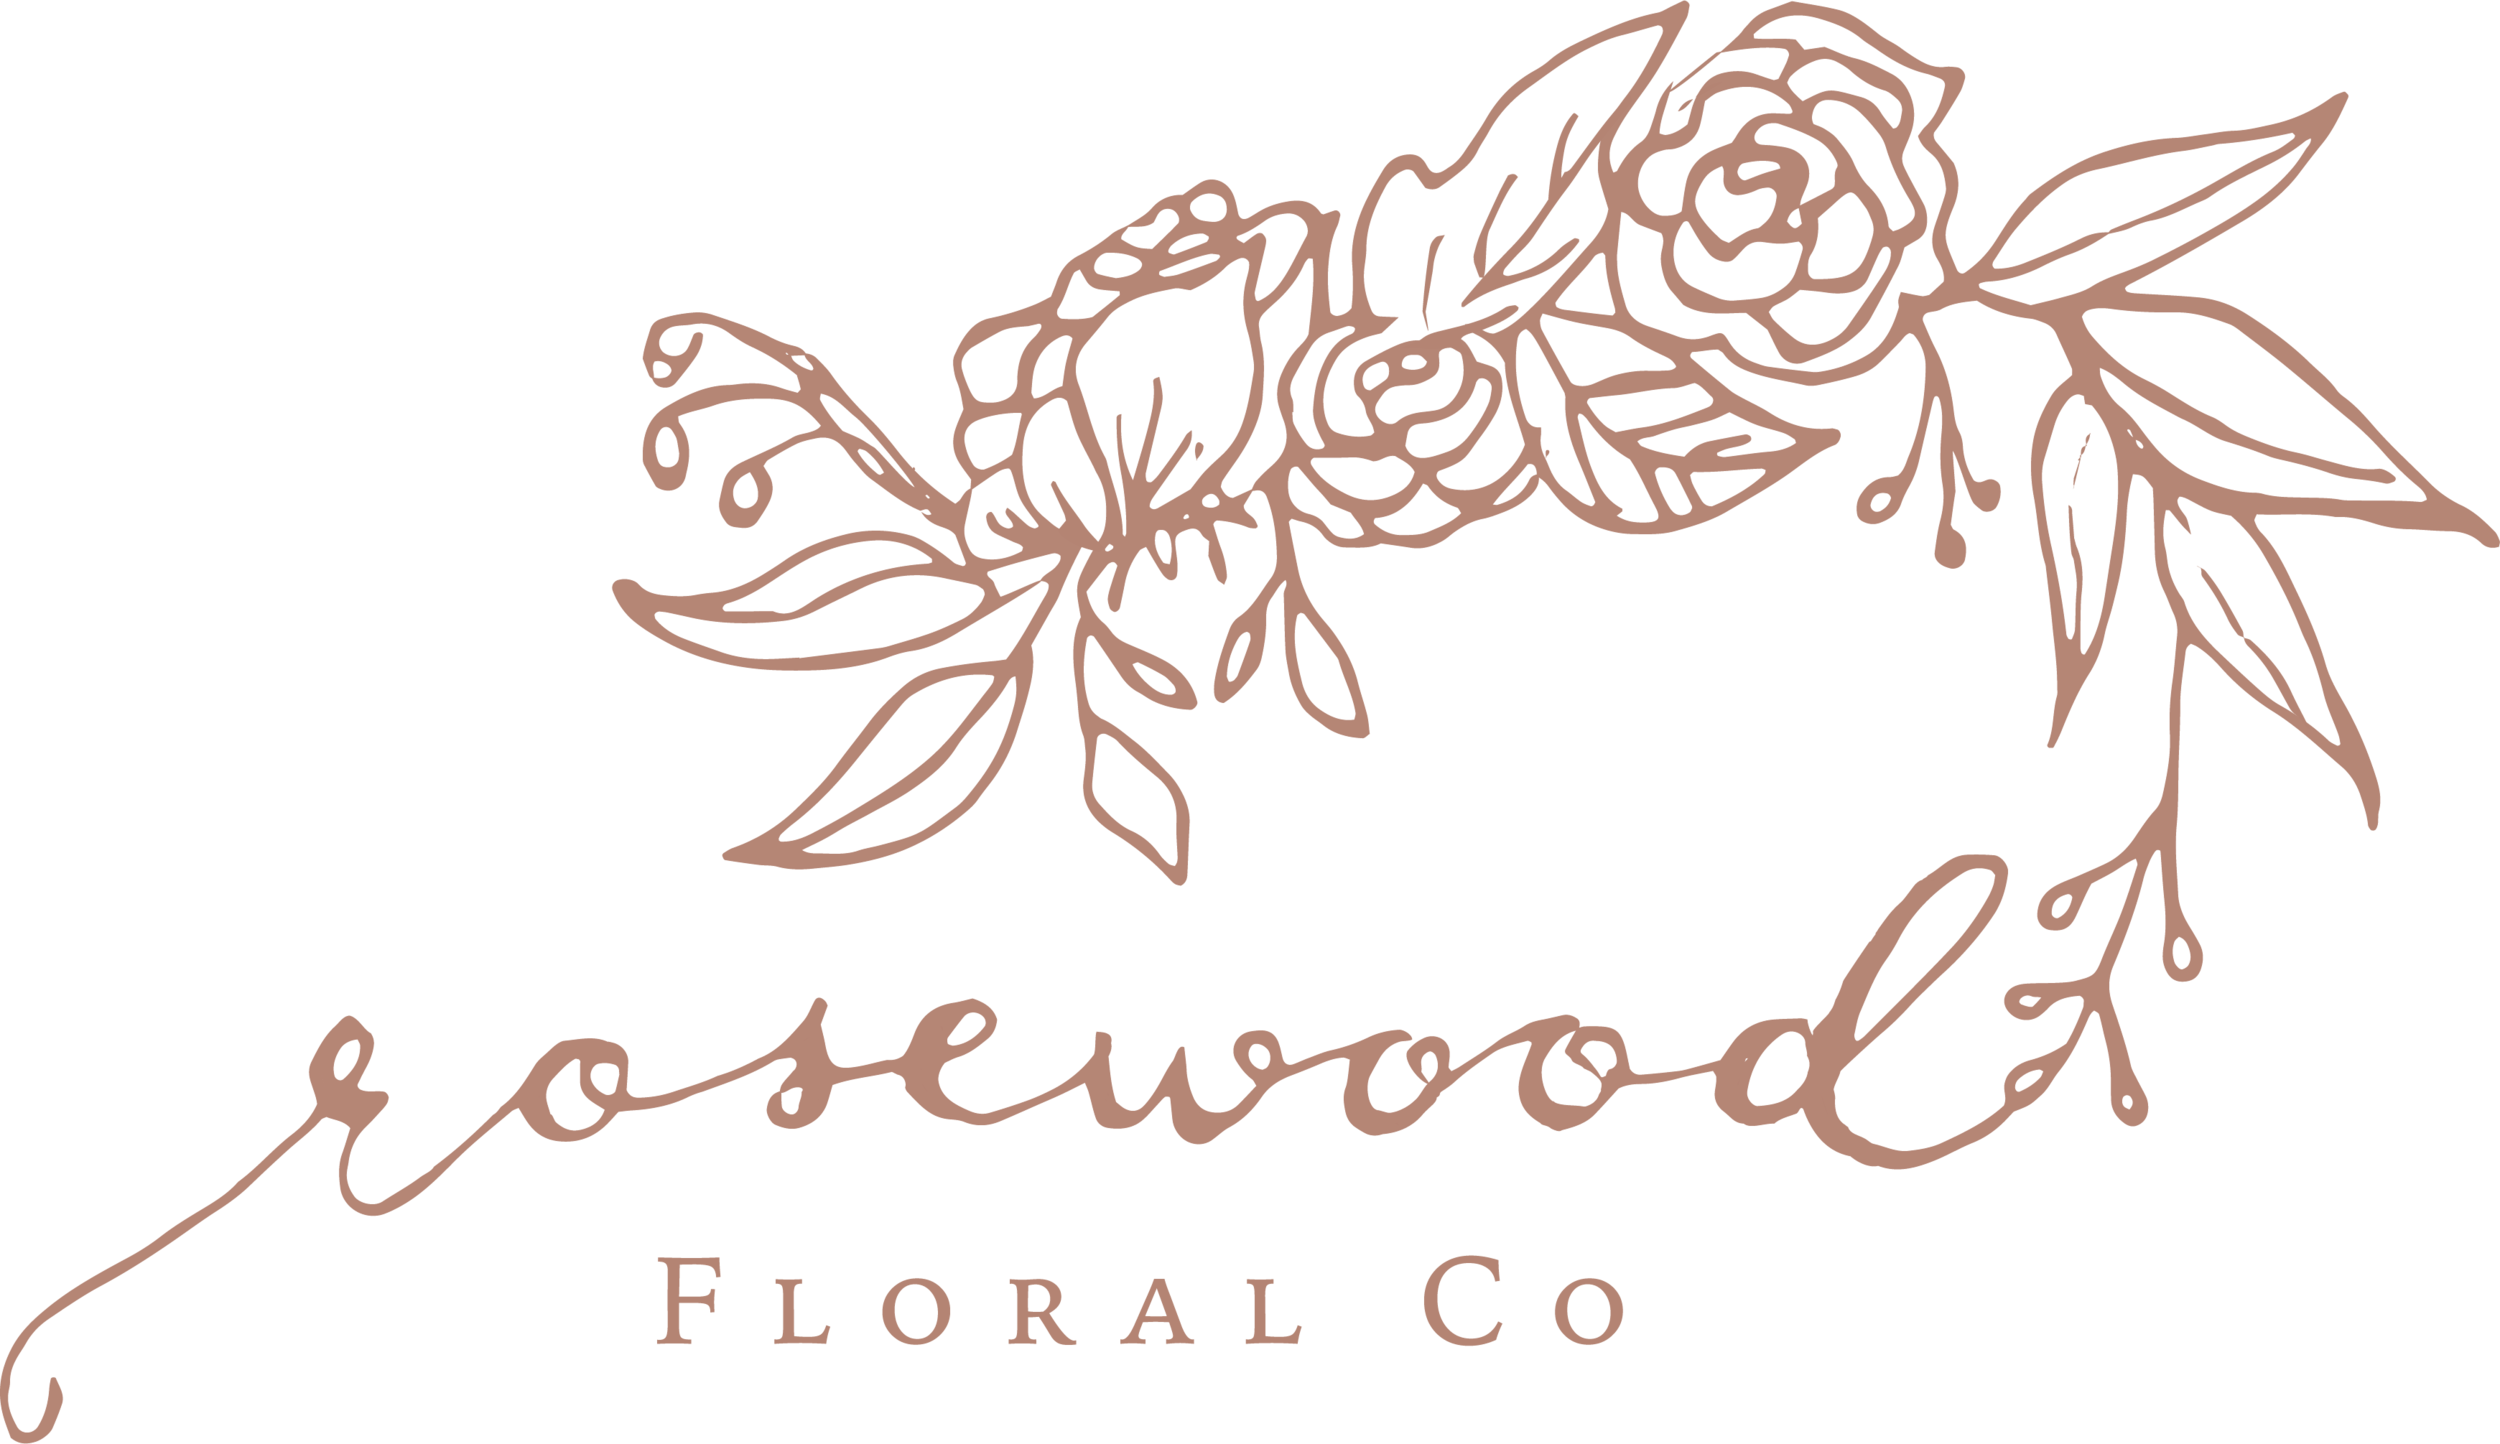 Rosewood Floral Co